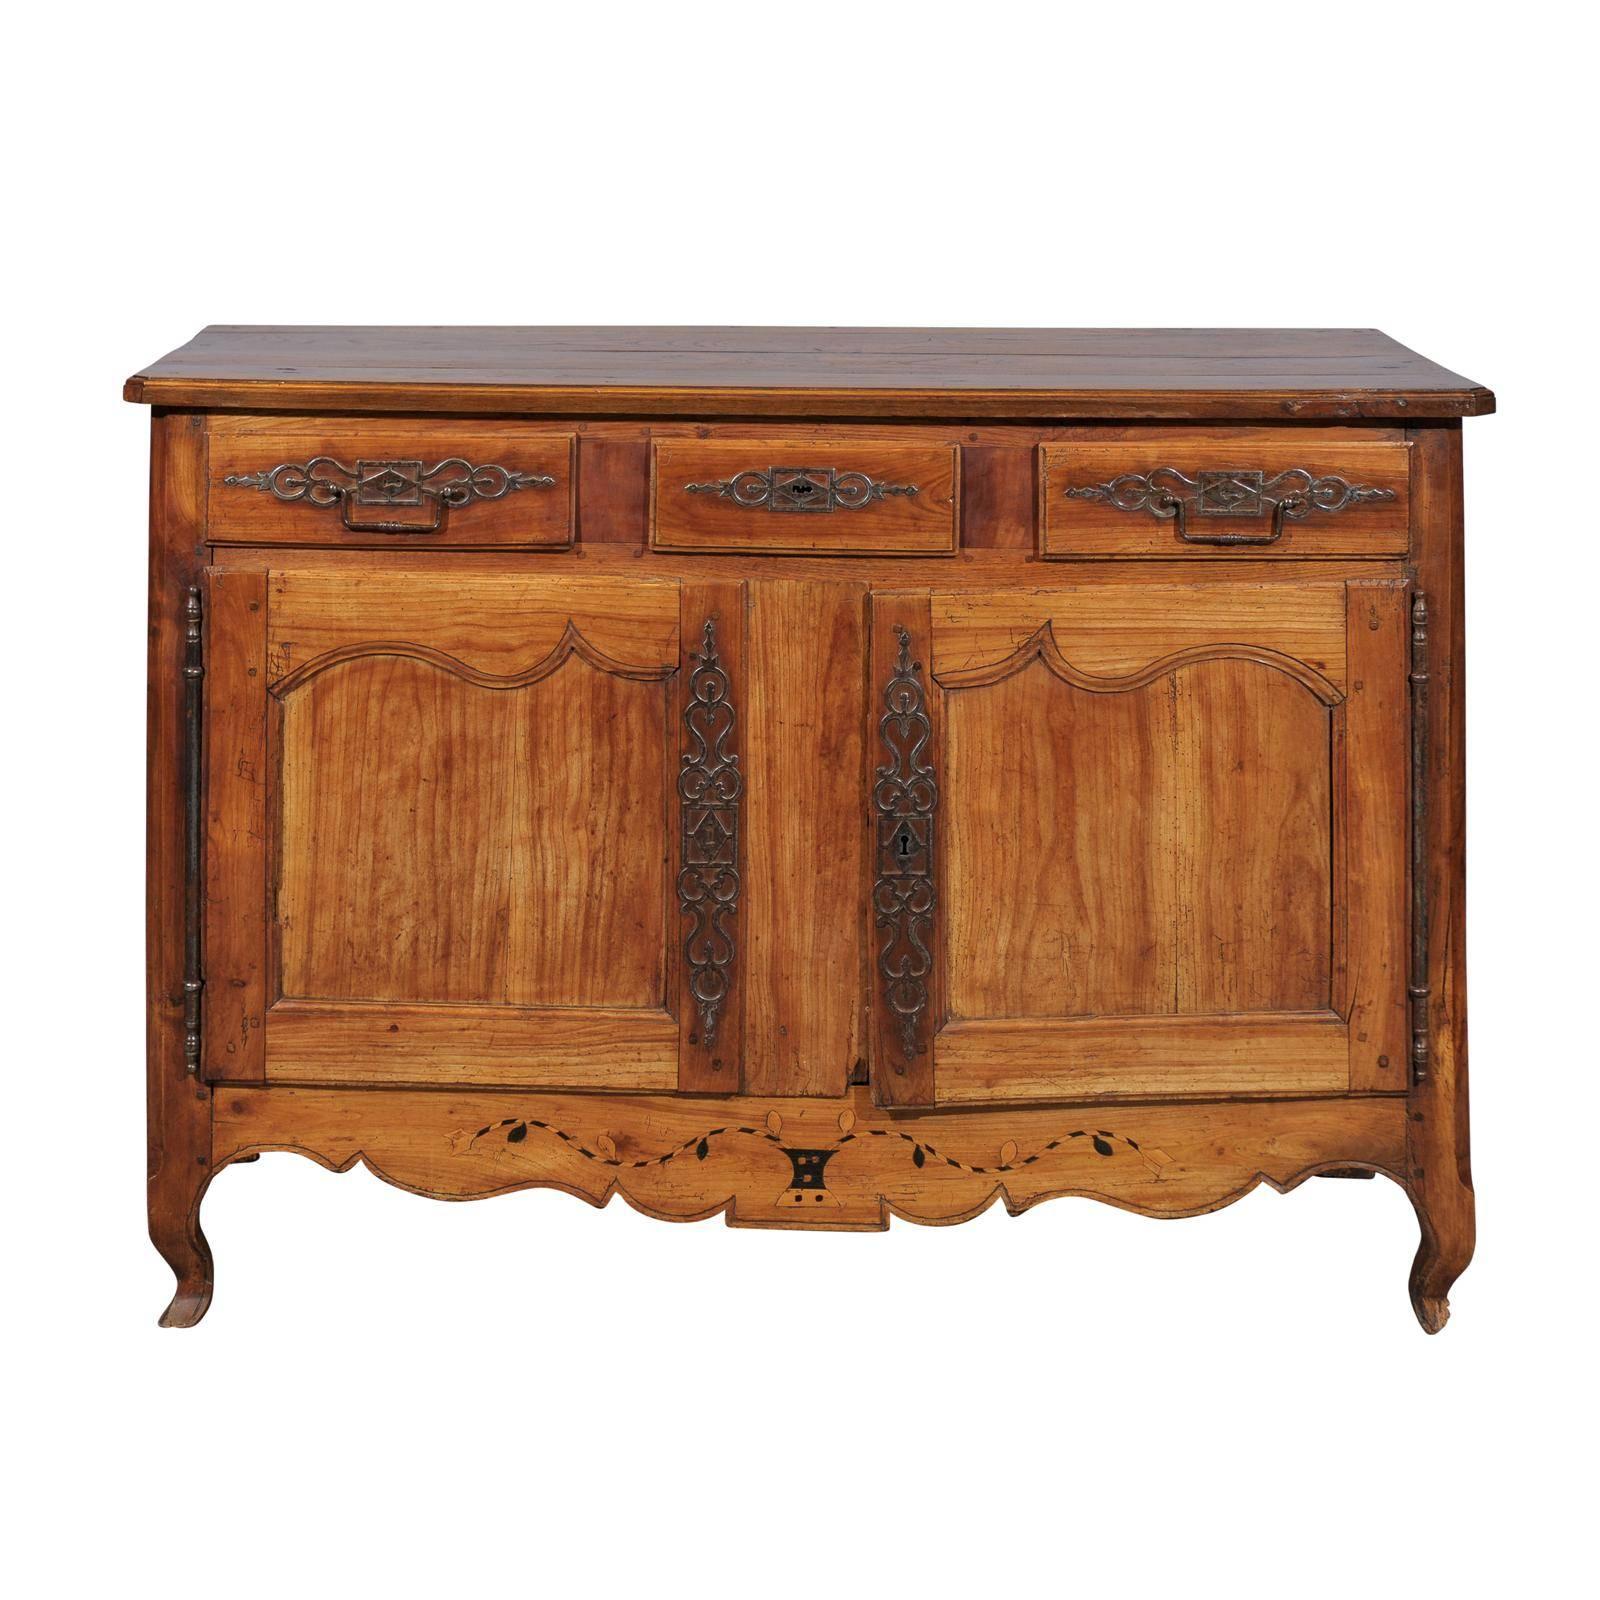 French Louis XV Style Fruitwood Buffet with Marquetry Inlay, circa 1820